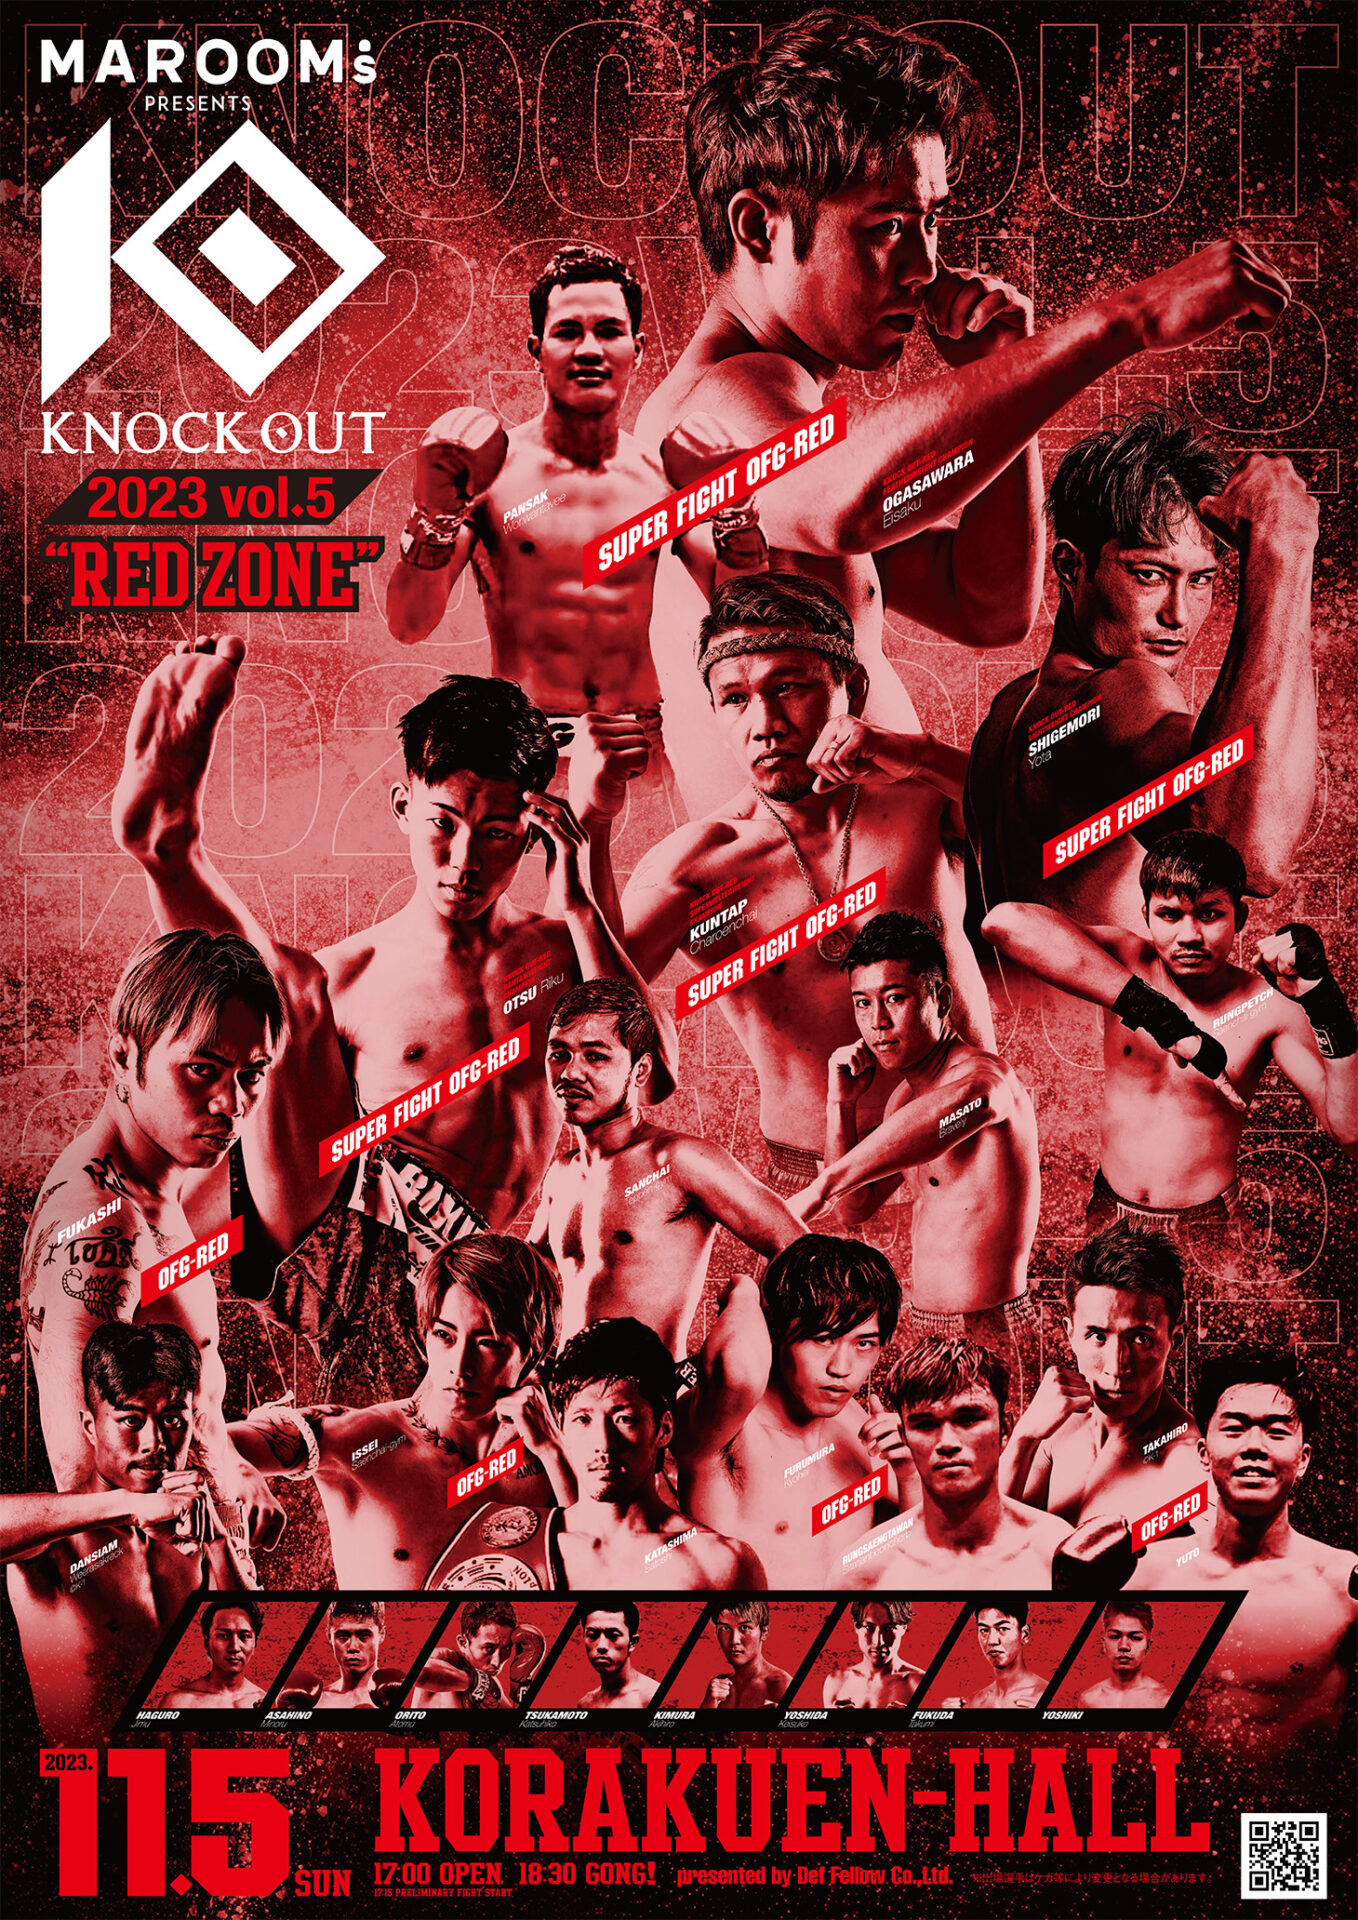 10919MAROOMS presents KNOCK OUT 2023 vol.5 “RED ZONE”